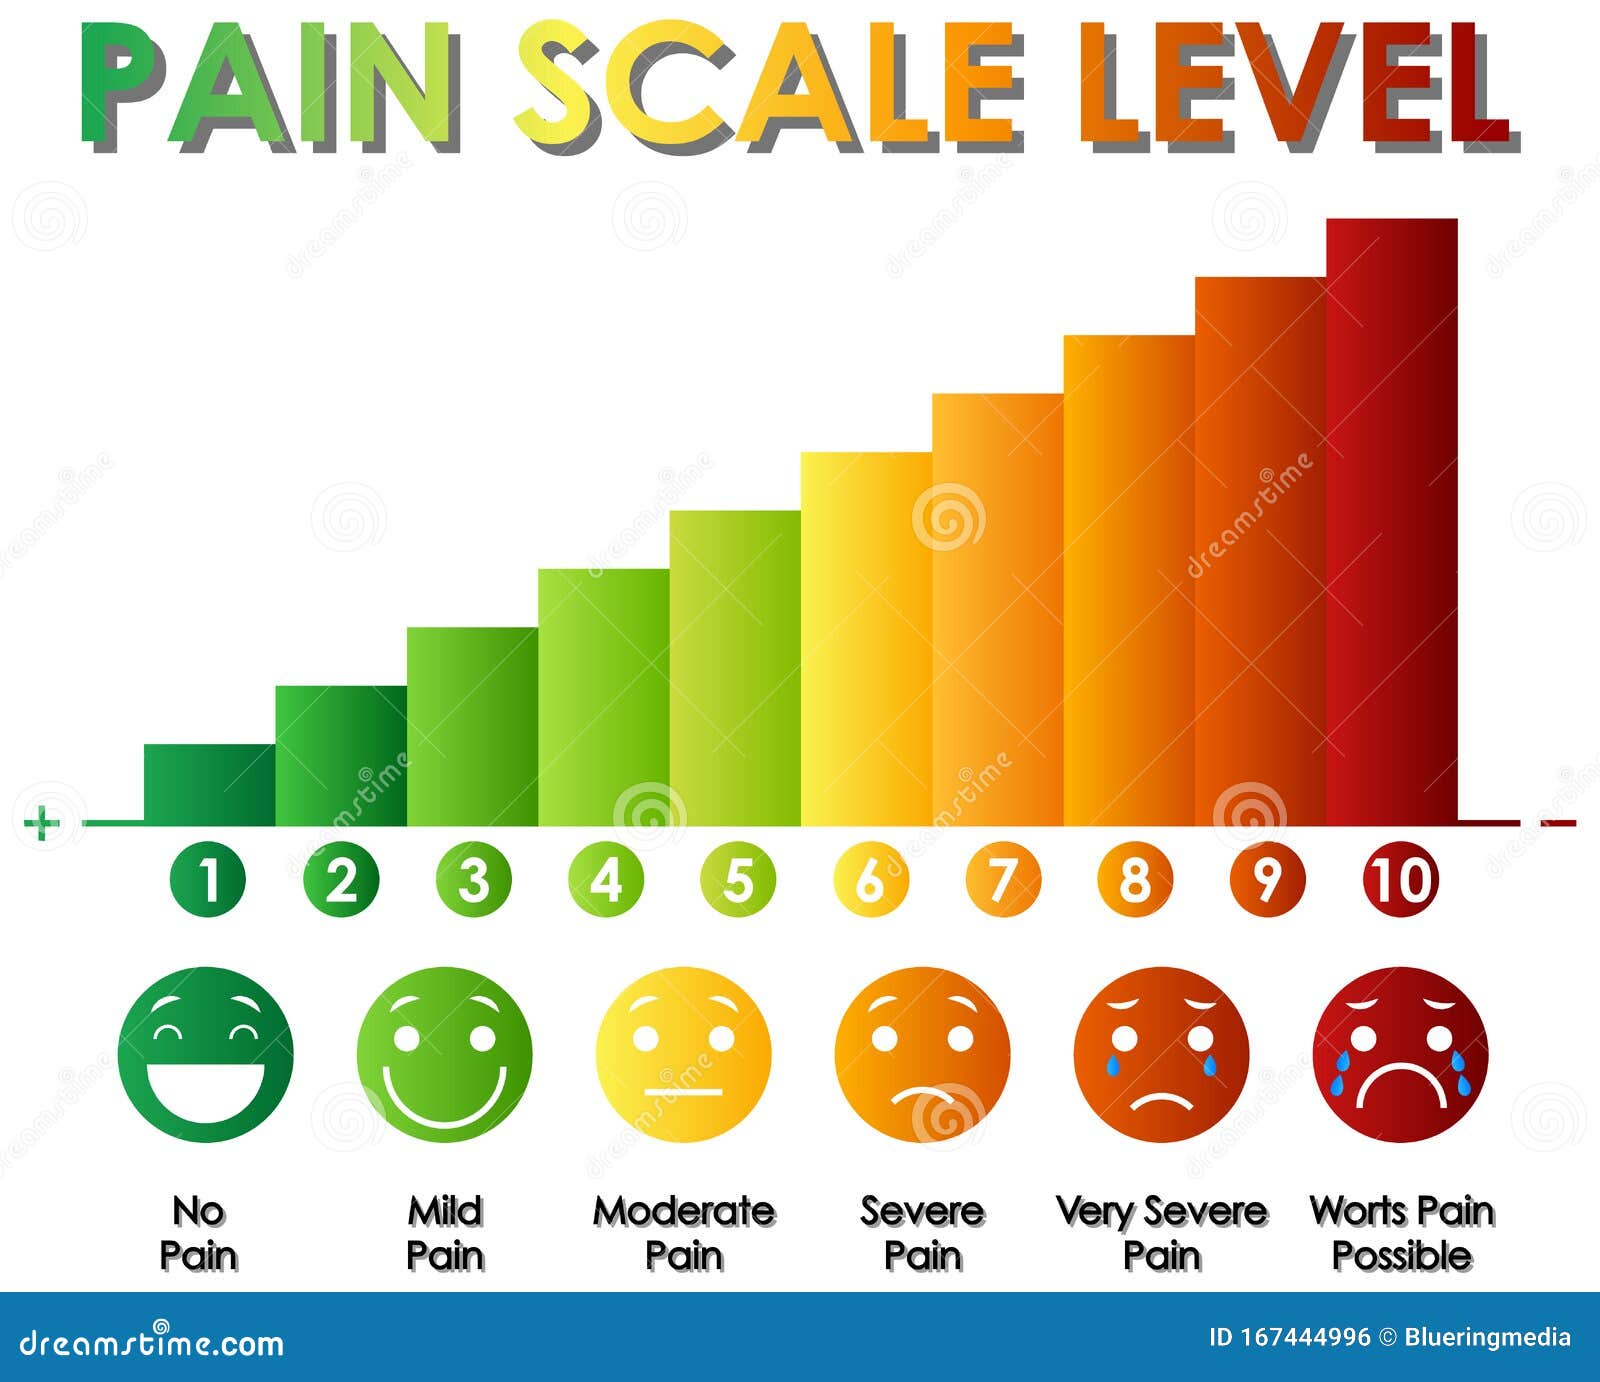 Diagram Showing Pain Scale Level with Different Colors Stock Vector